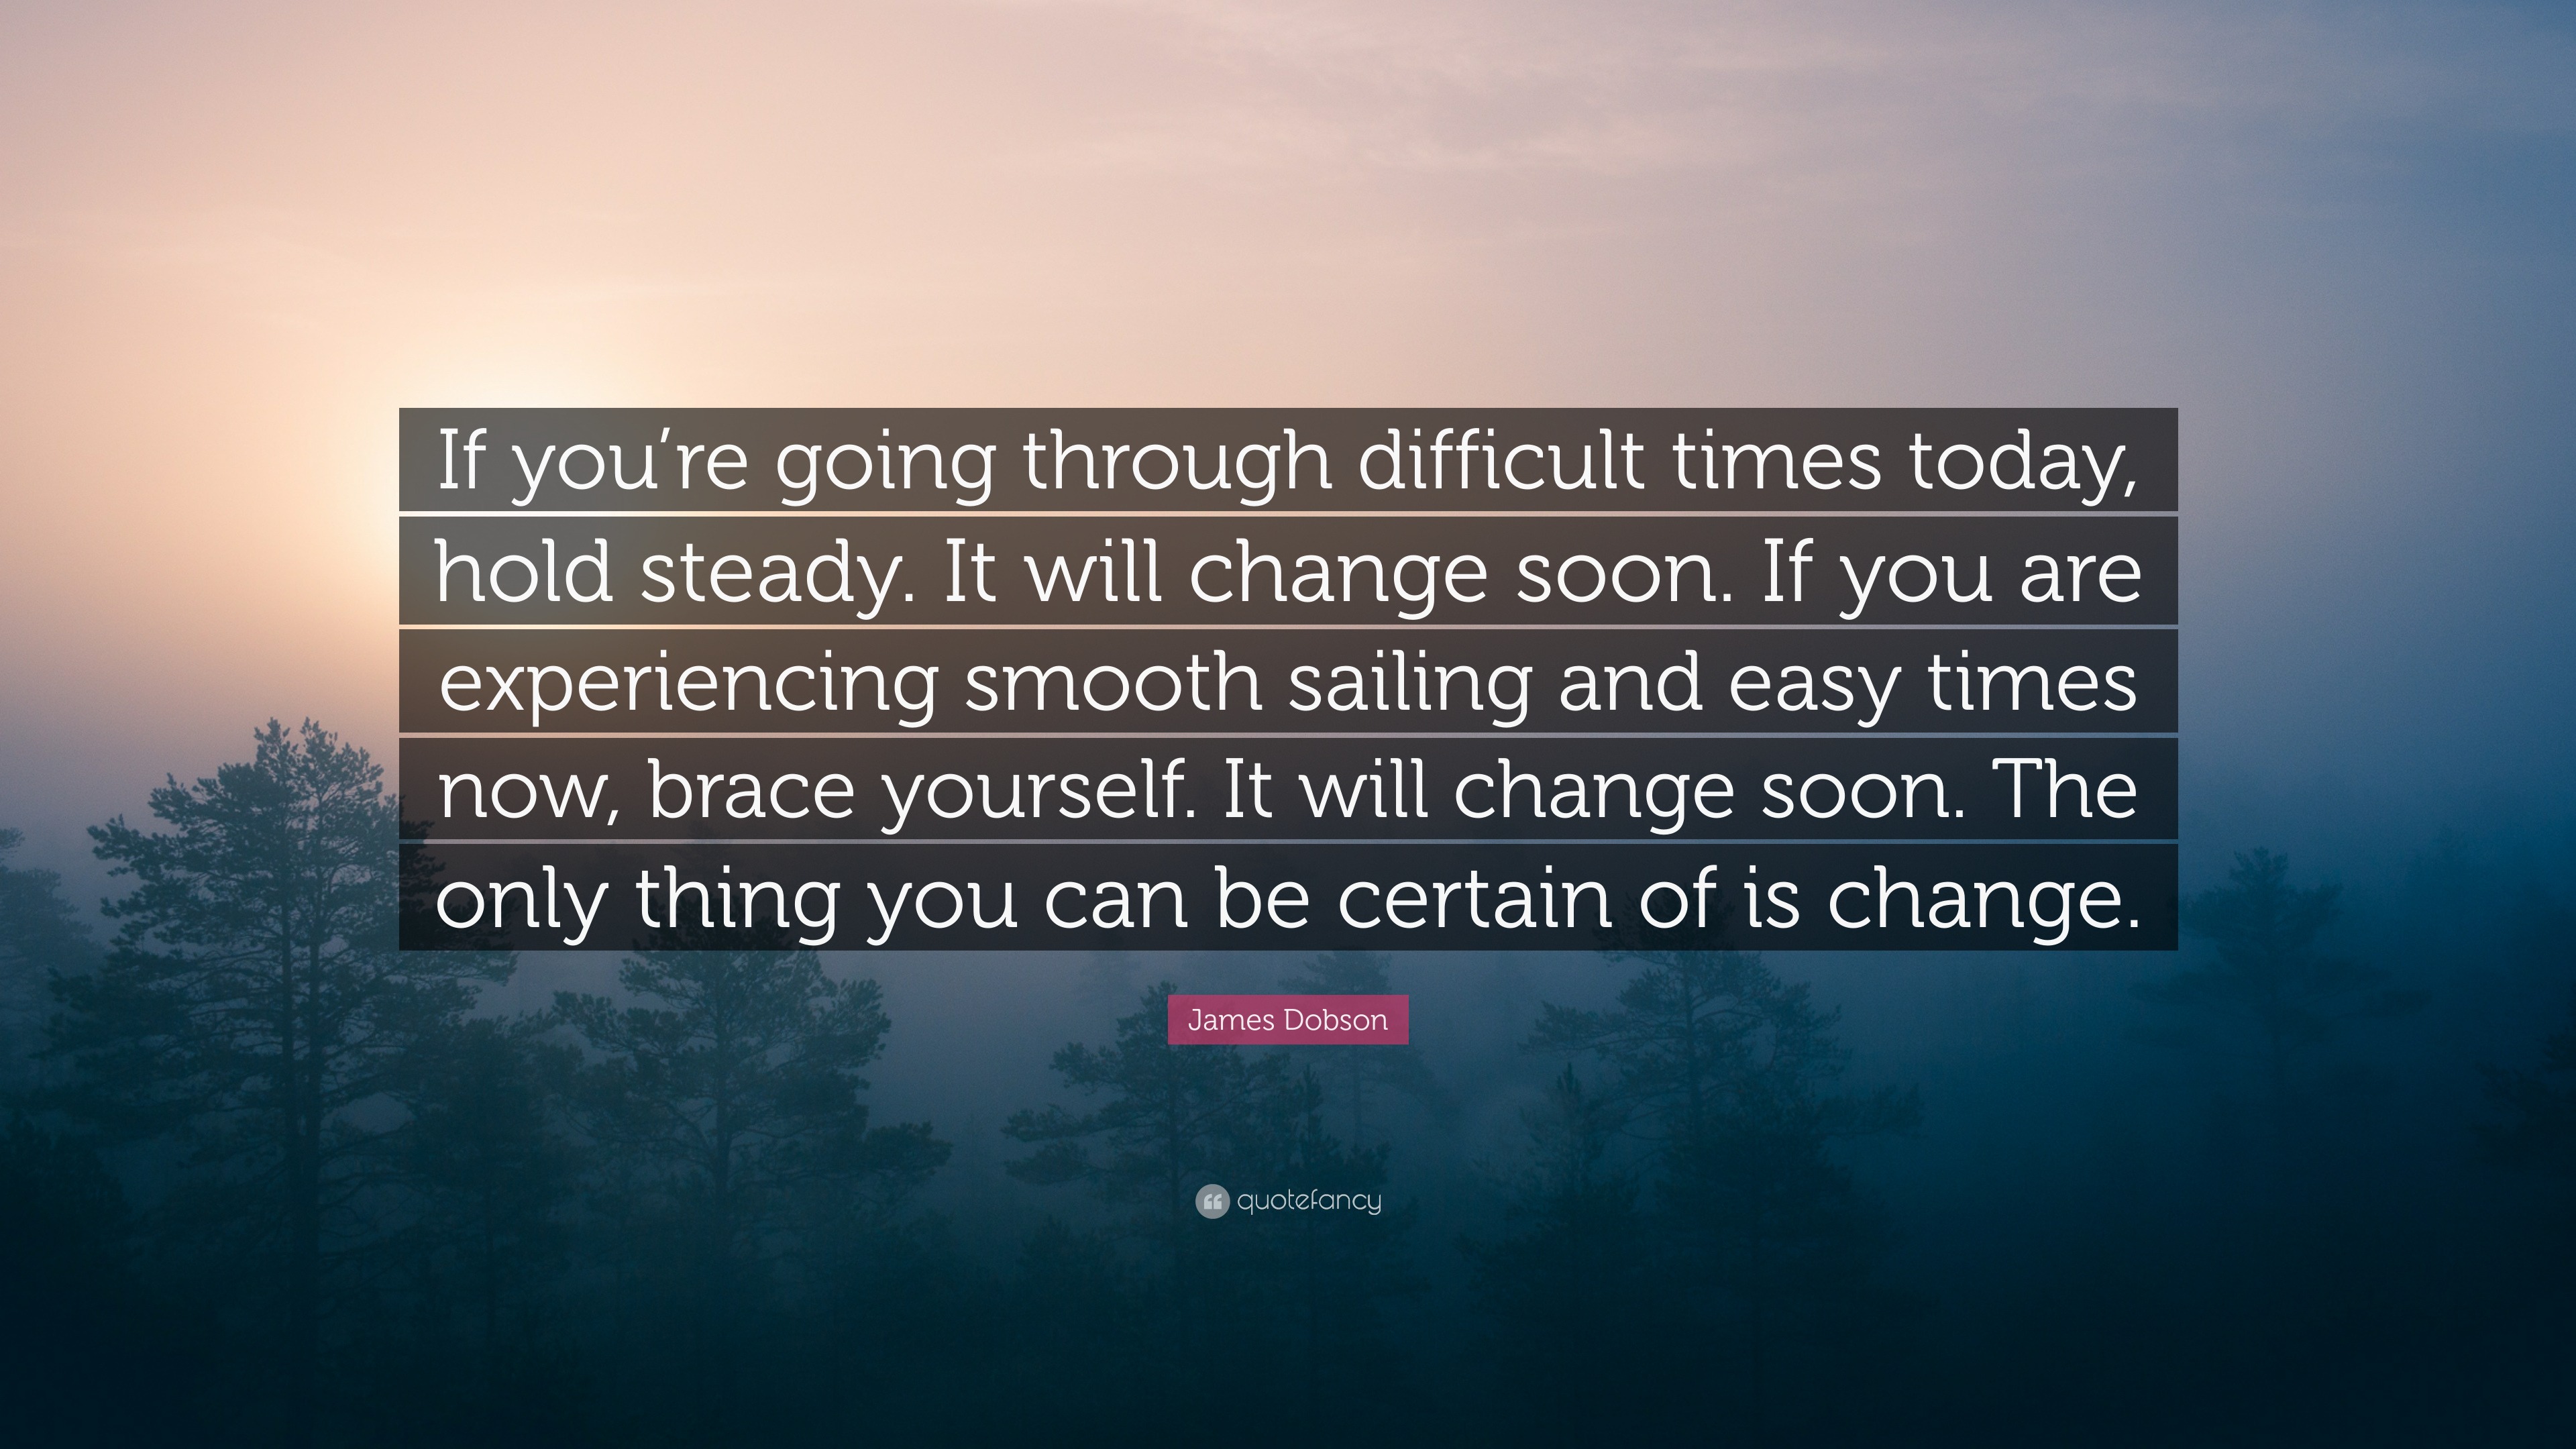 James Dobson Quote: “If you’re going through difficult times today